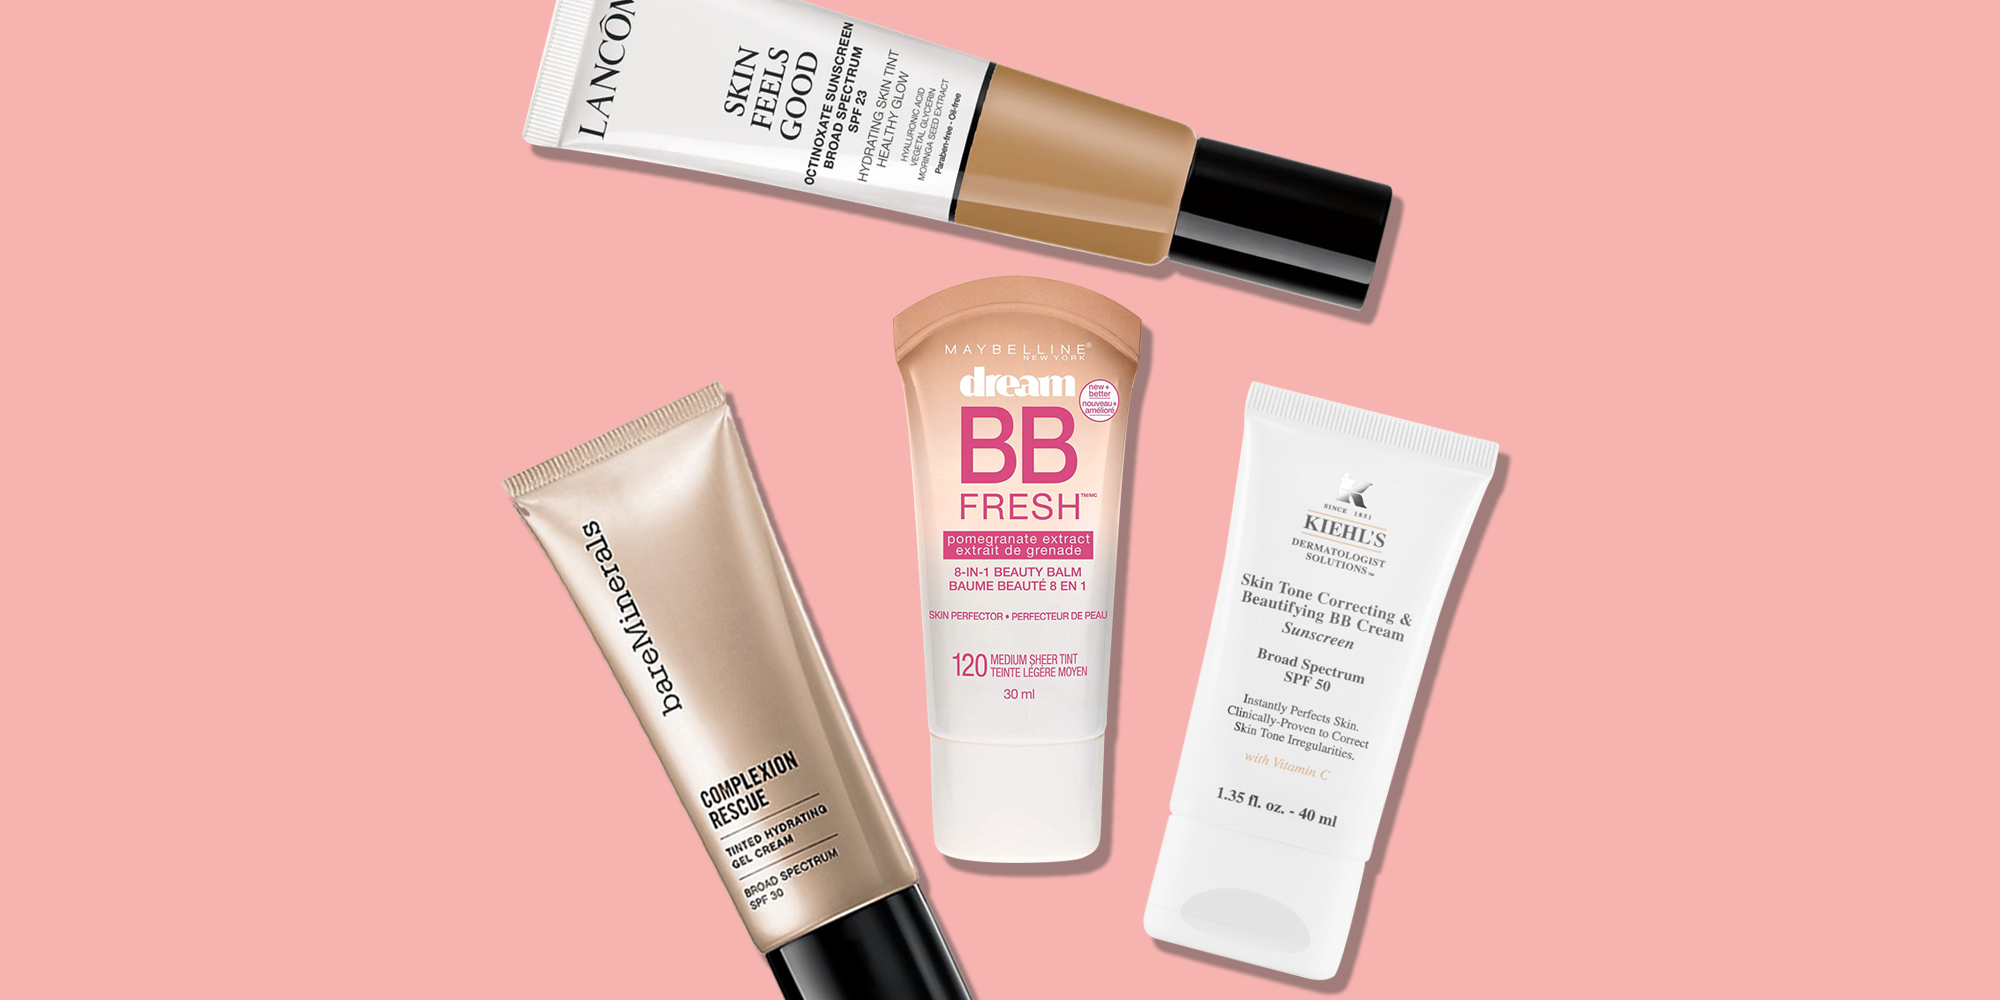  Maybelline Dream Fresh Skin Hydrating BB cream, 8-in-1 Skin  Perfecting Beauty Balm with Broad Spectrum SPF 30, Sheer Tint Coverage,  Oil-Free, Medium, 1 Fl Oz : Face Tints : Beauty